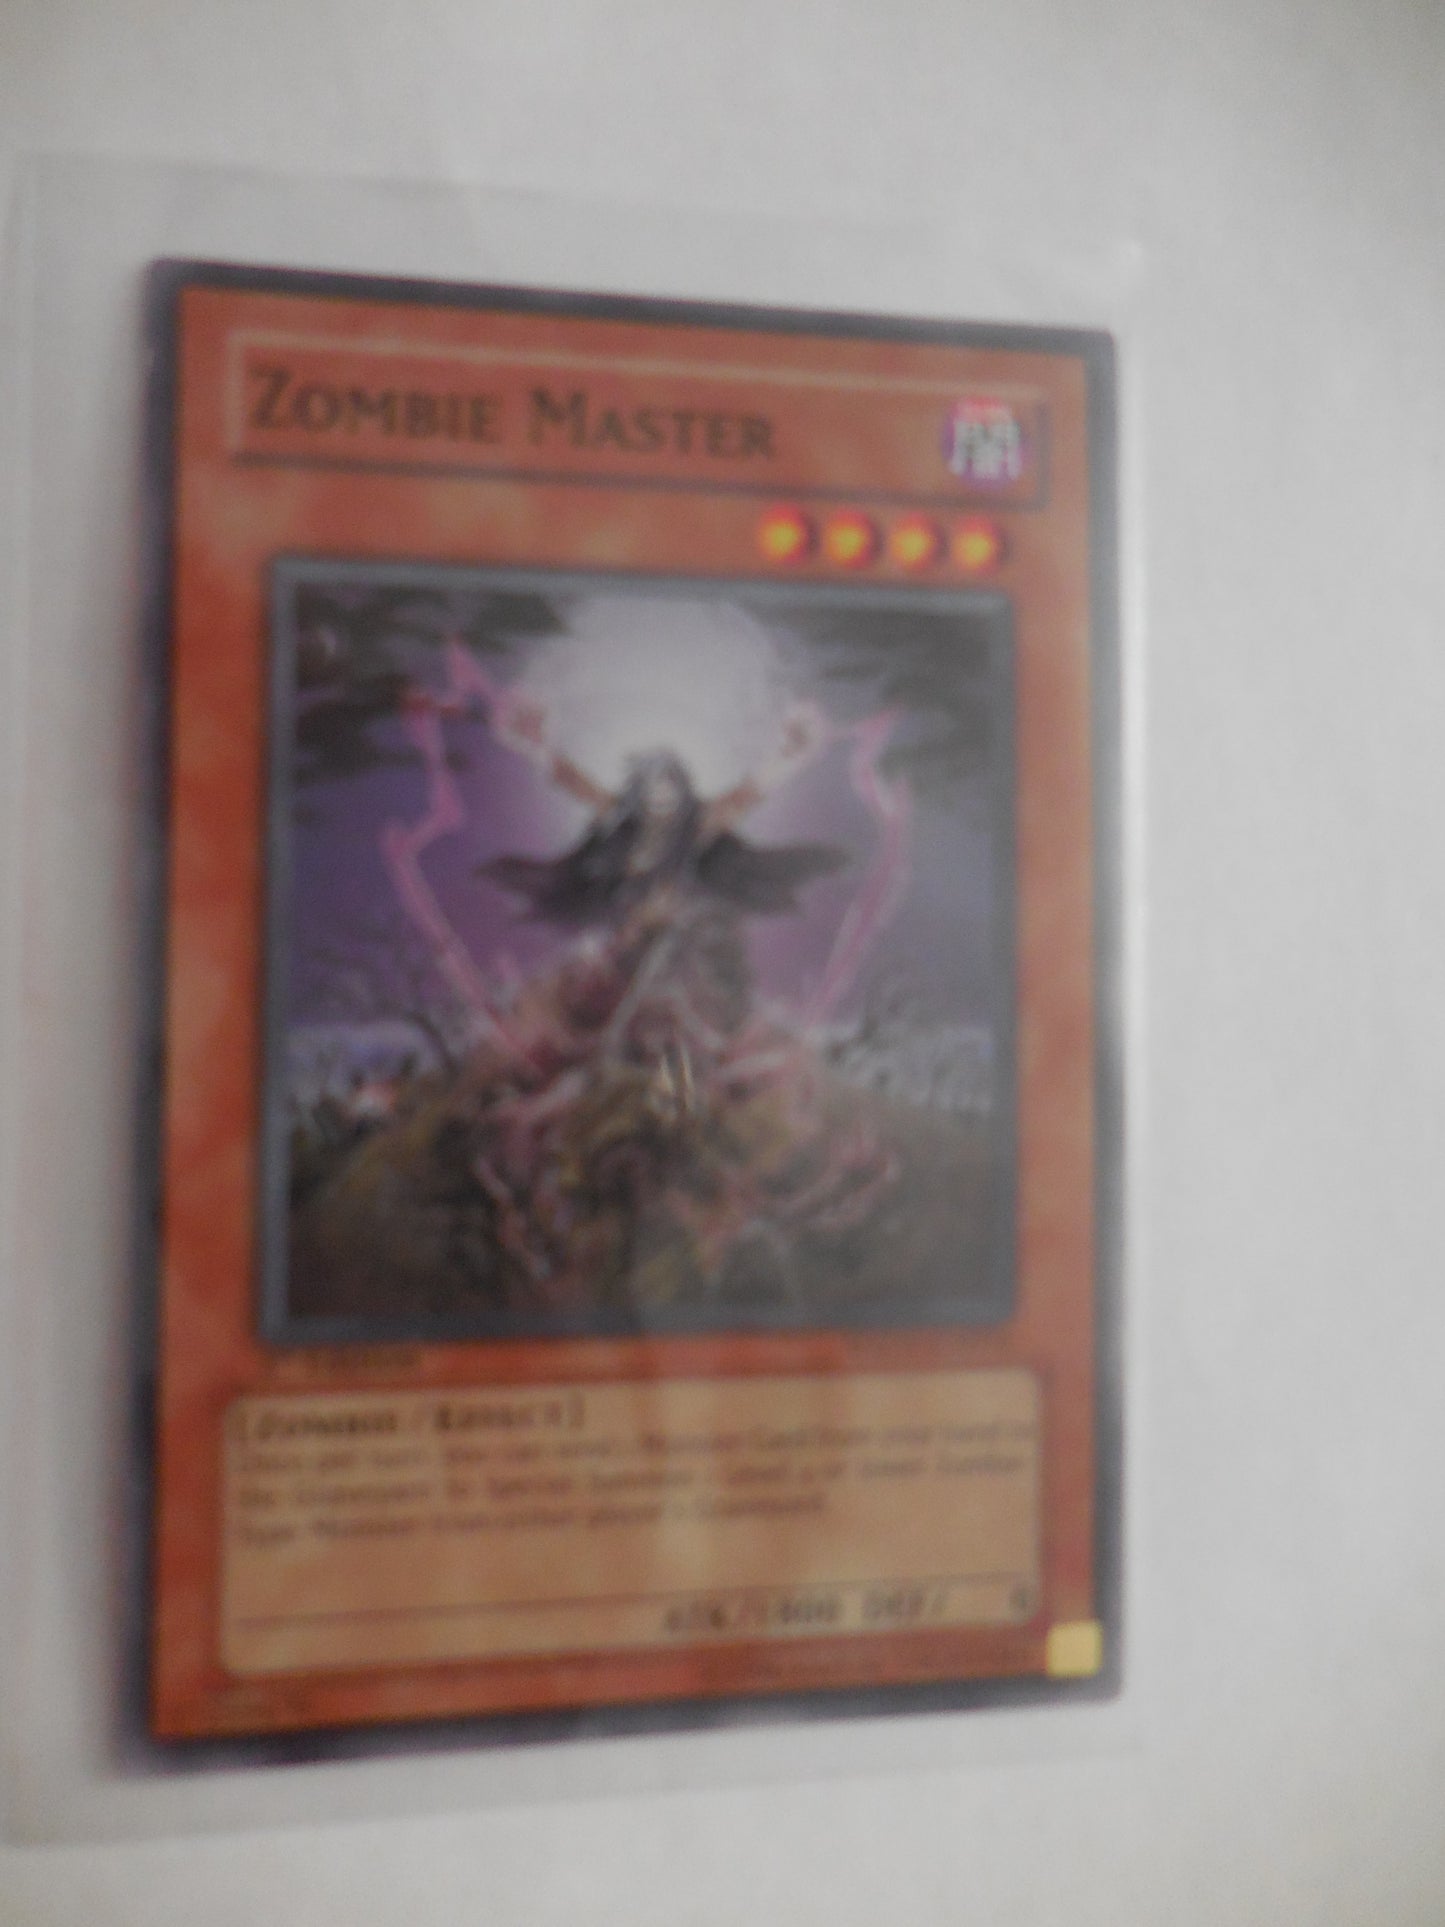 ZOMBIE MASTER COMMMON 1ST EDITION